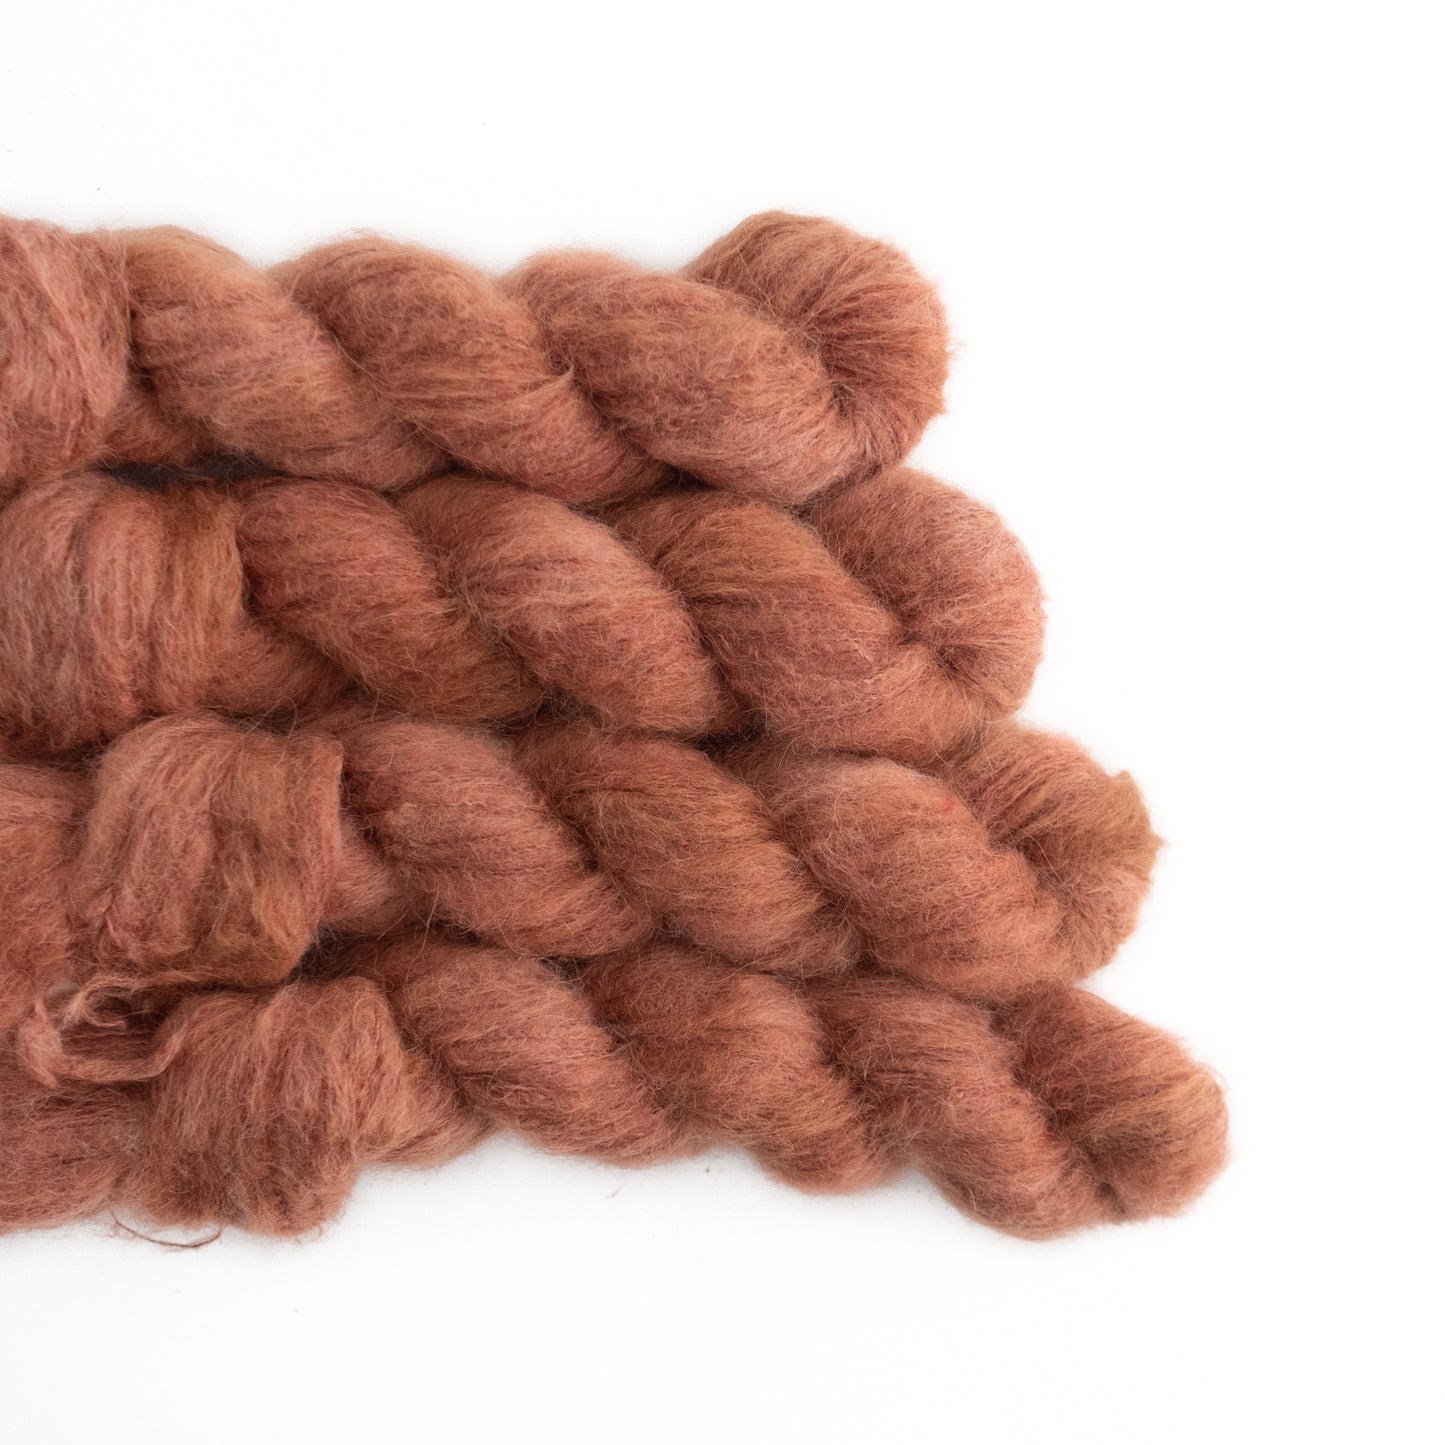 Burnt Umber | Dyed To Order